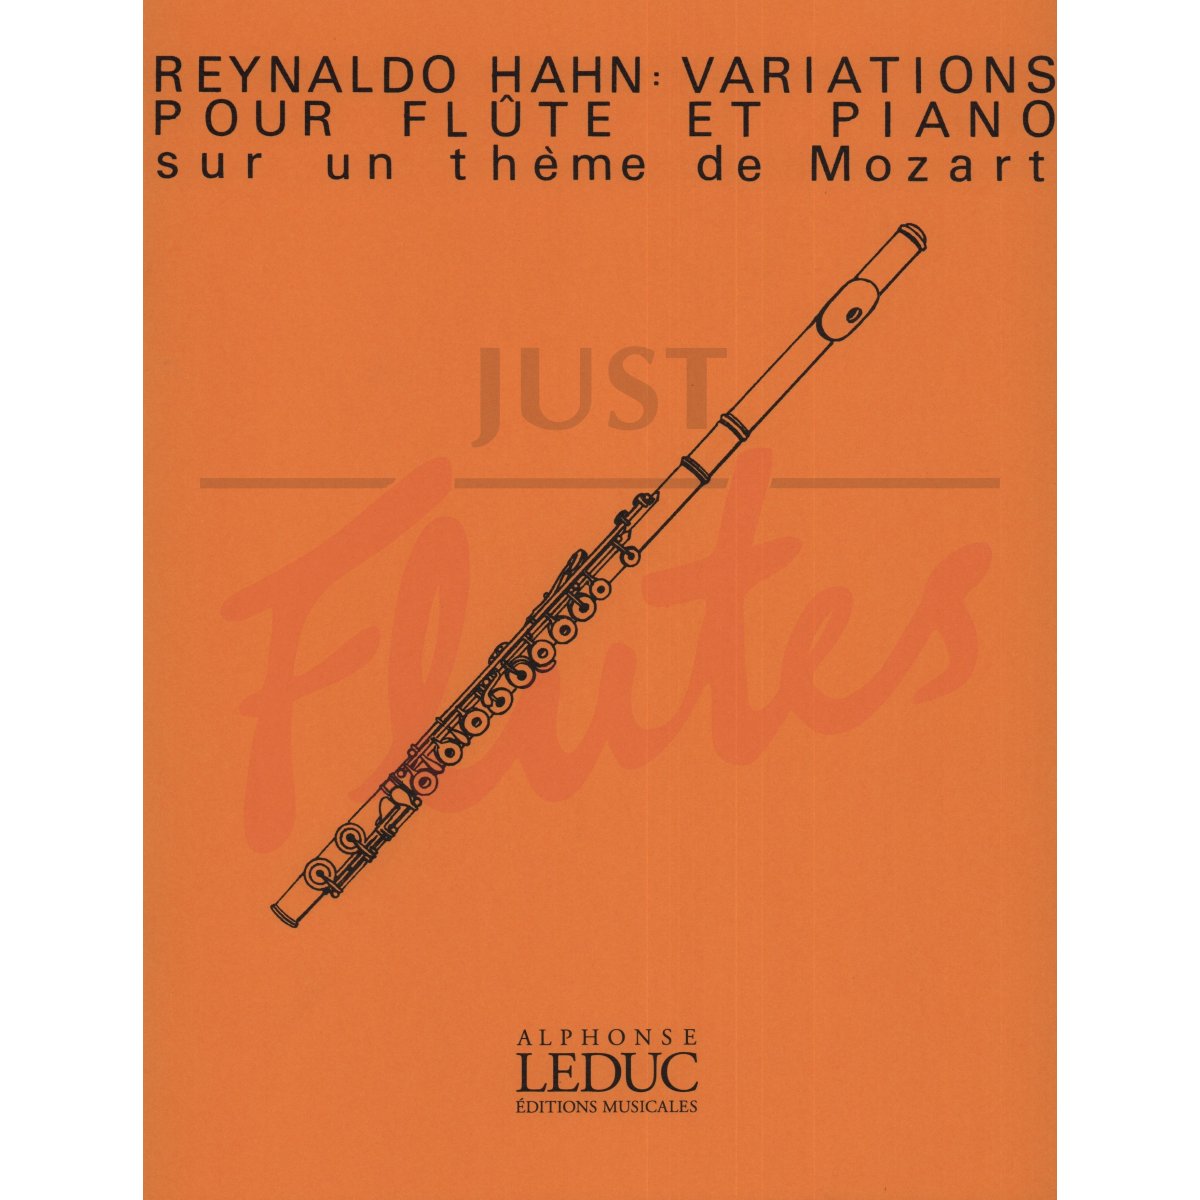 Variations on a Theme of Mozart for Flute and Piano